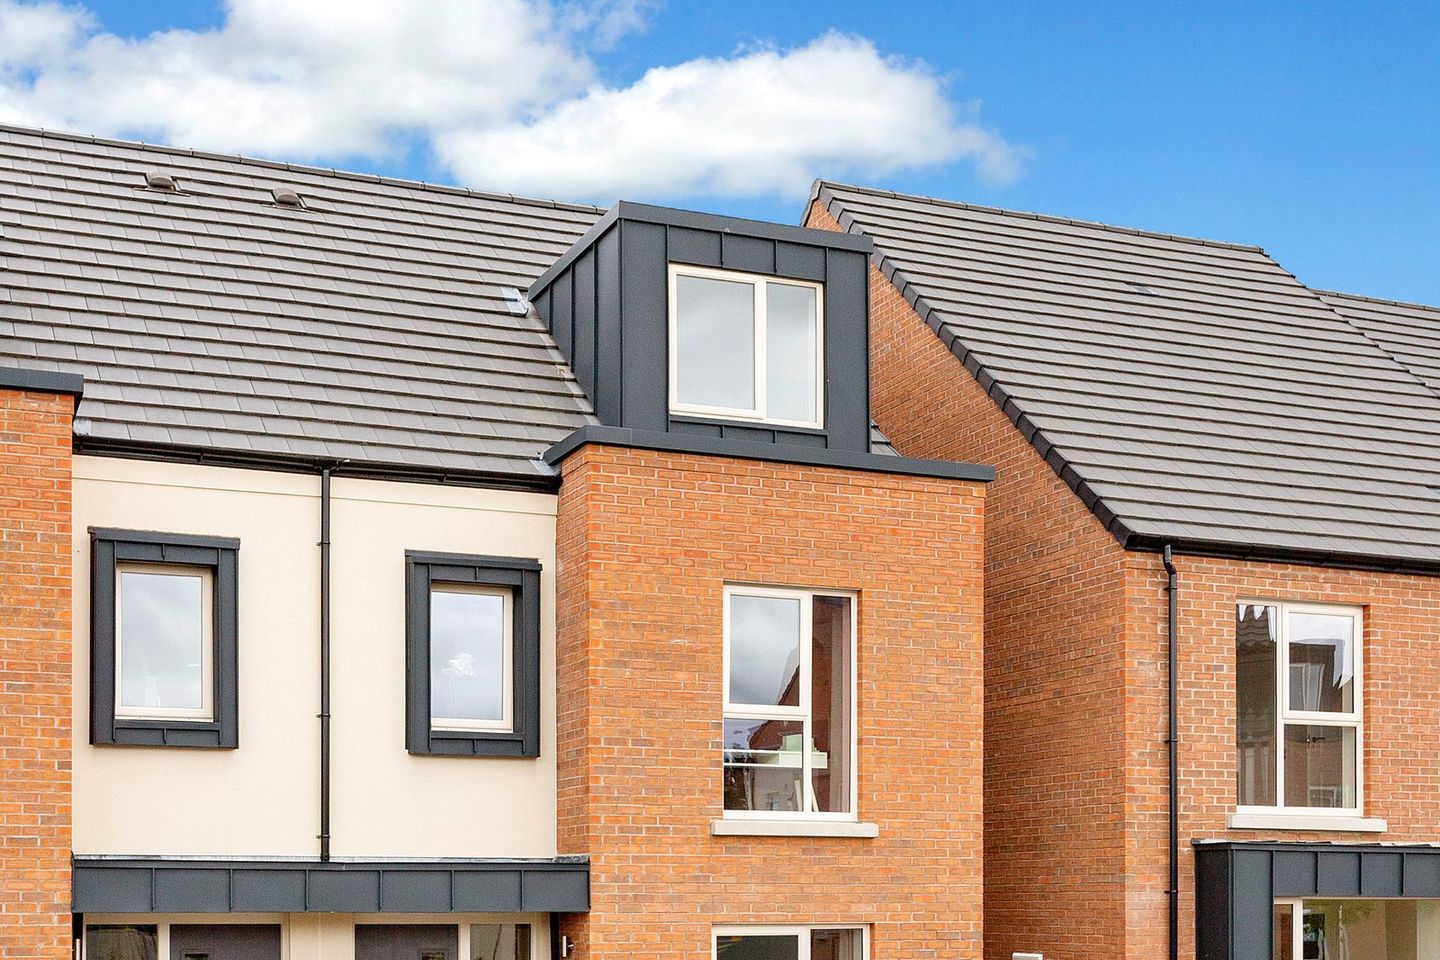 The Ash - 3 Bed plus study -Type 1, Newtown Wood Drogheda, Newtown Wood Drogheda , Drogheda, Drogheda, Co. Louth